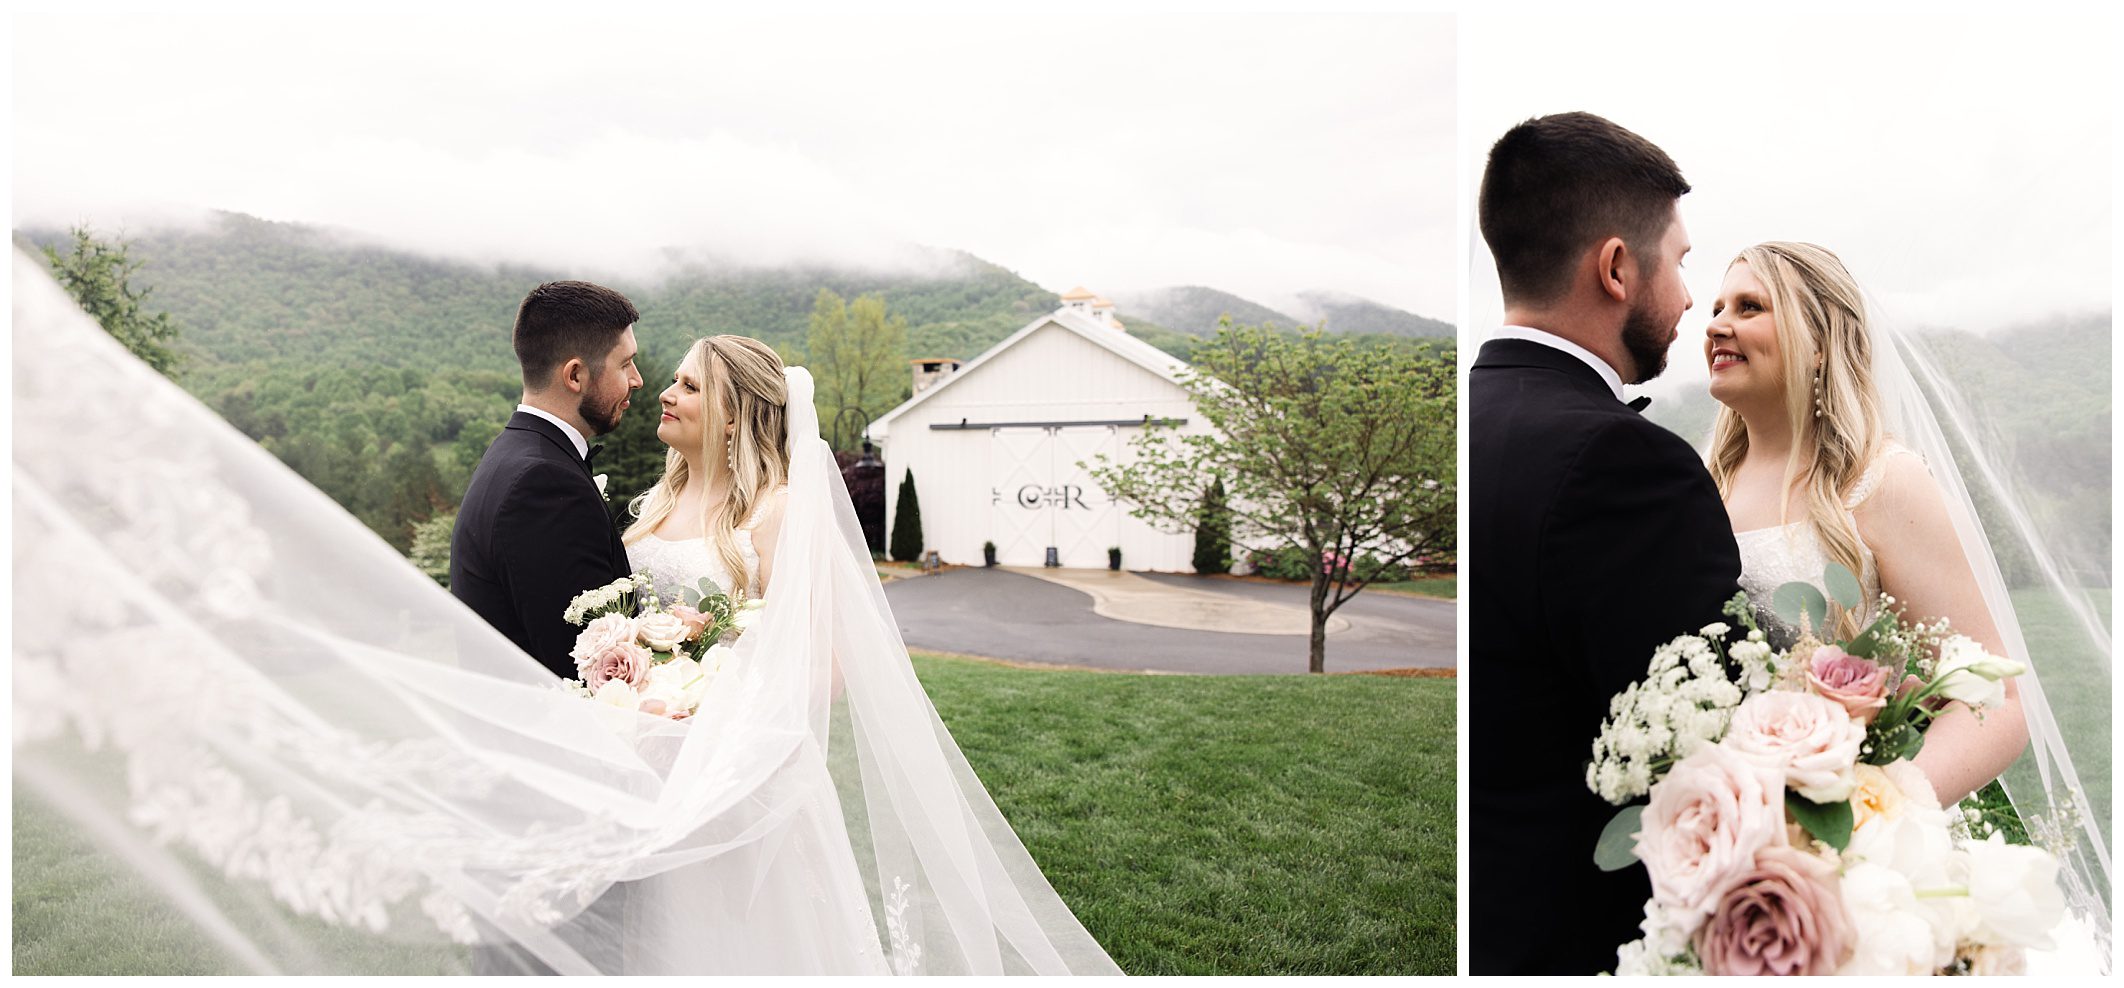 A bride and groom stand outdoors holding hands, with rolling hills at Chestnut Ridge in the background; the bride's veil gently flows in the foreground.